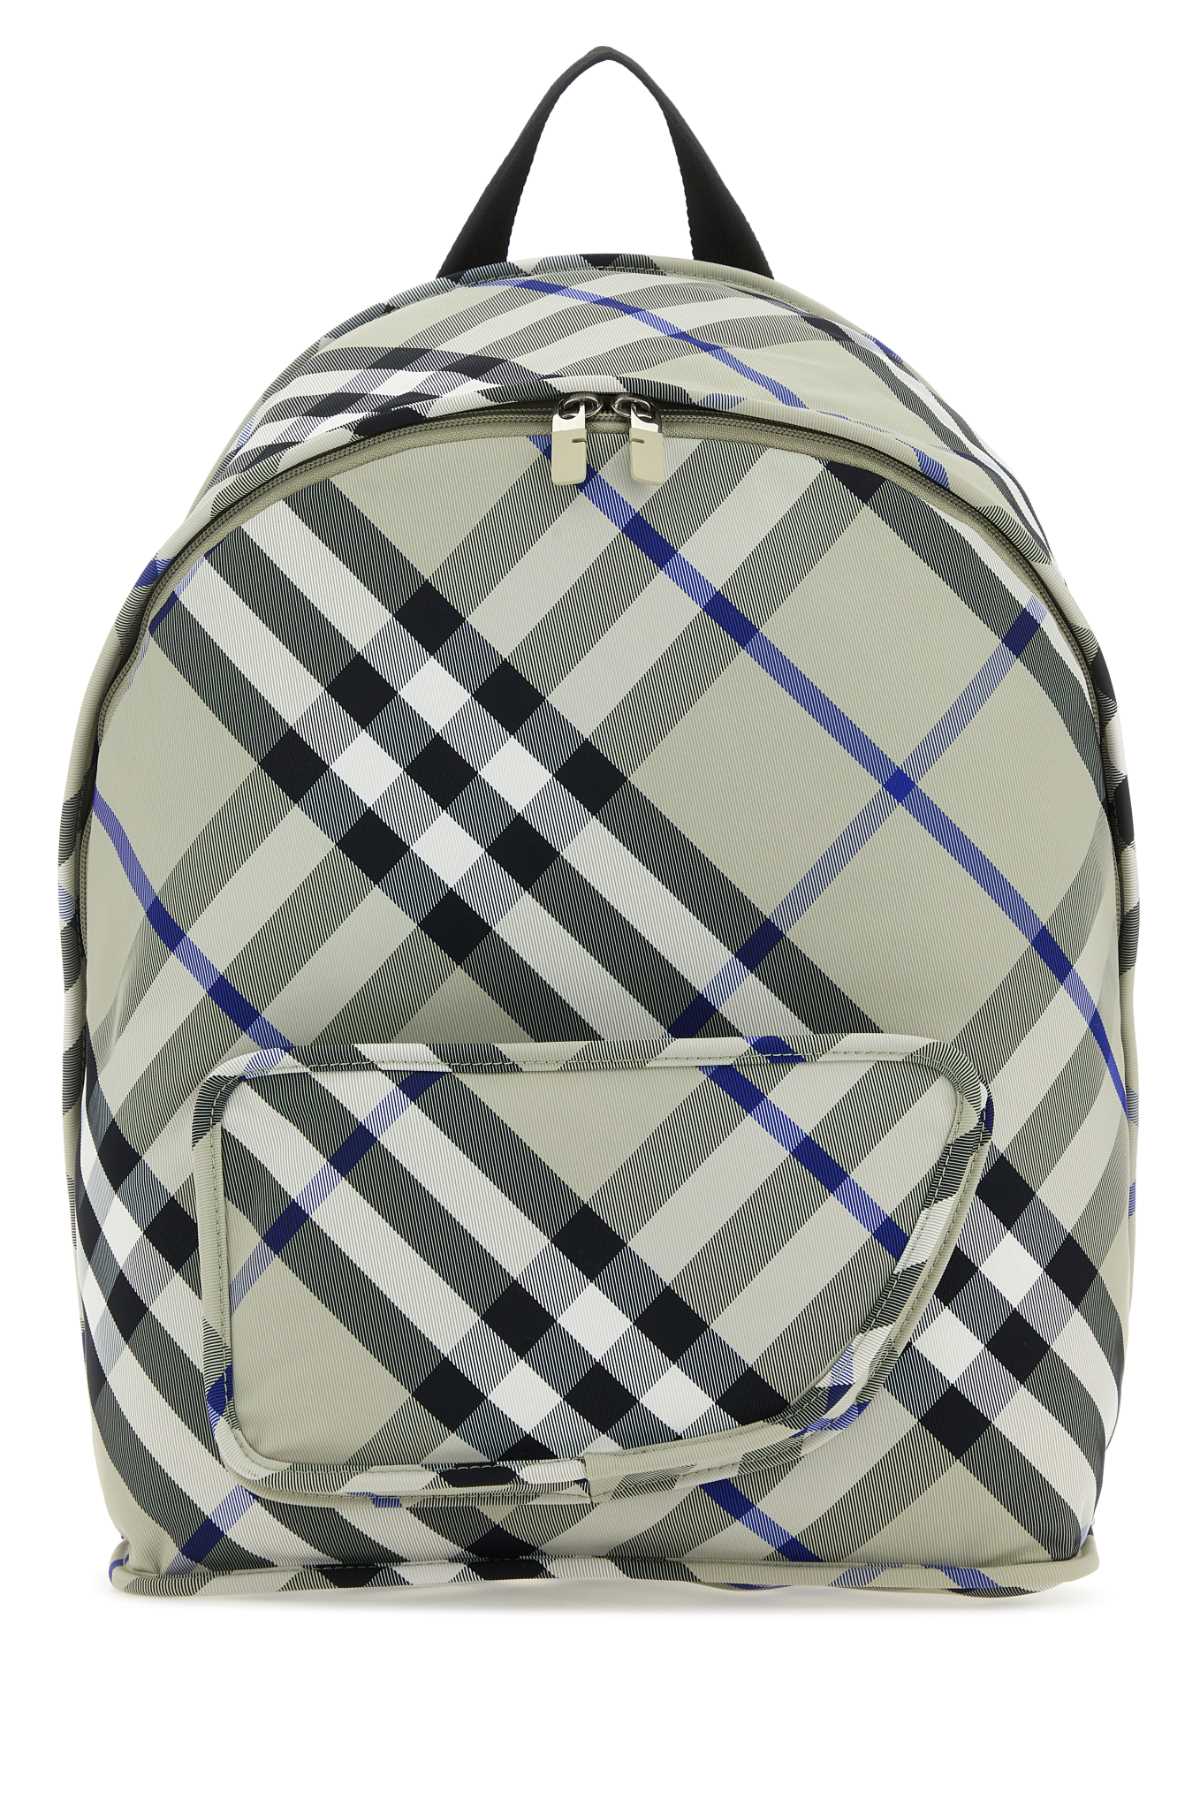 Burberry Printed Nylon Shield Backpack In Lichen